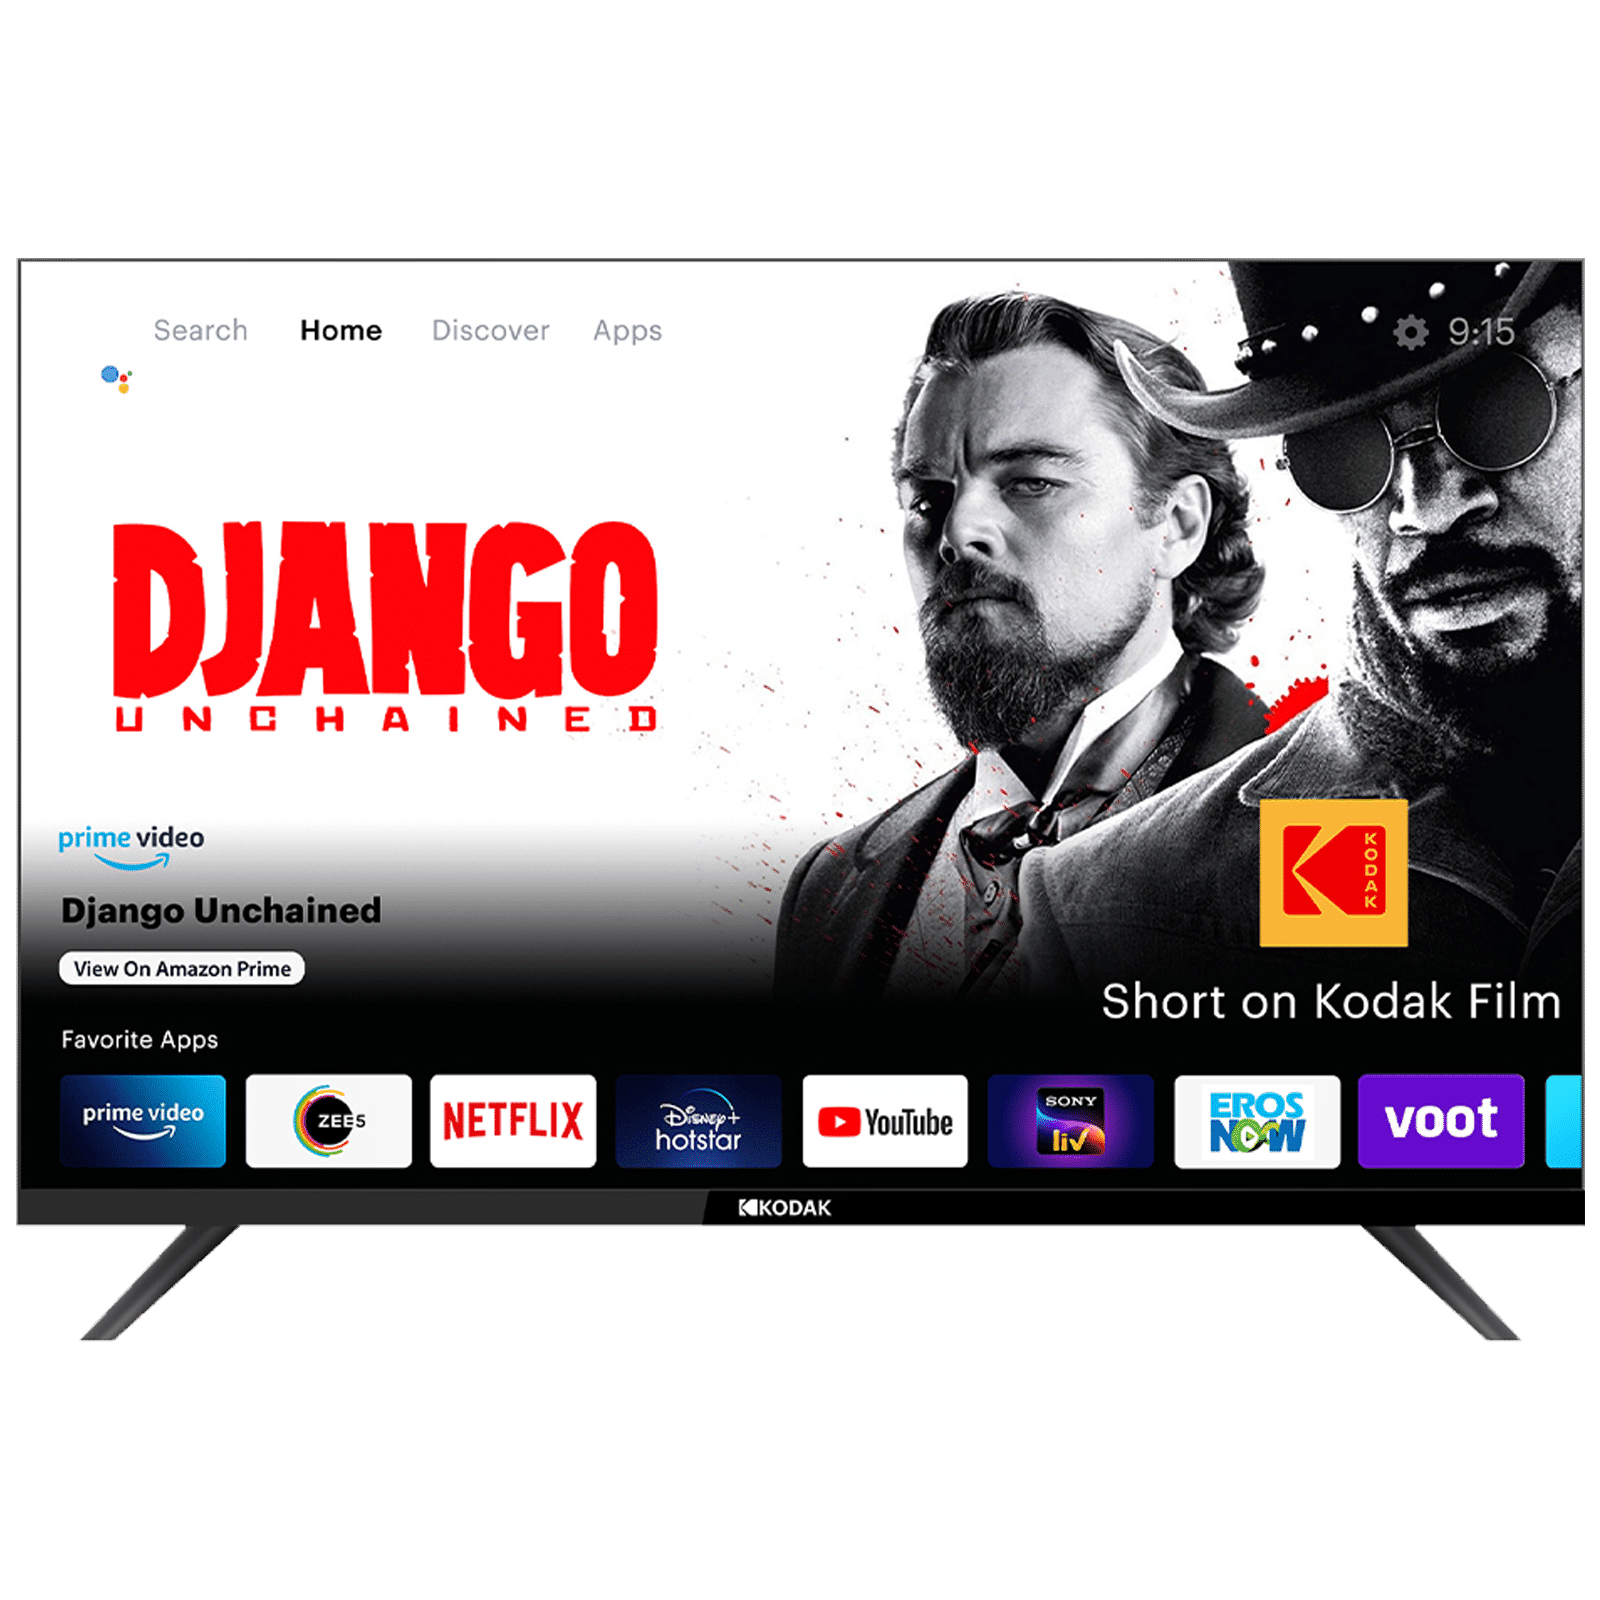 Buy Kodak 9xpro 108 Cm 43 Inch Full Hd Led Smart Android Tv With Dolby Audio Online Croma 3921